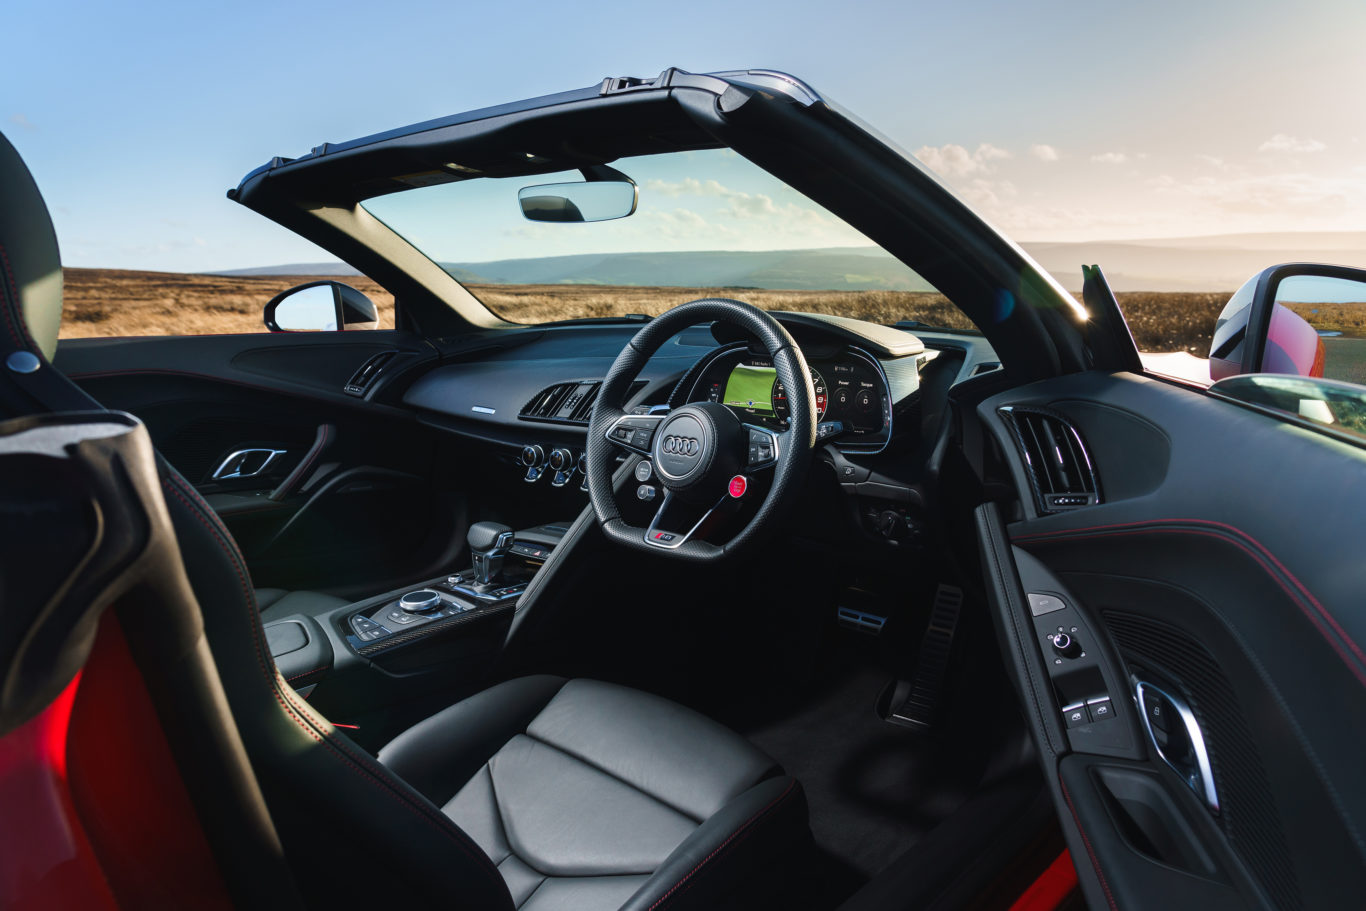 The Spyder's cabin is more compact than the one in the Coupe